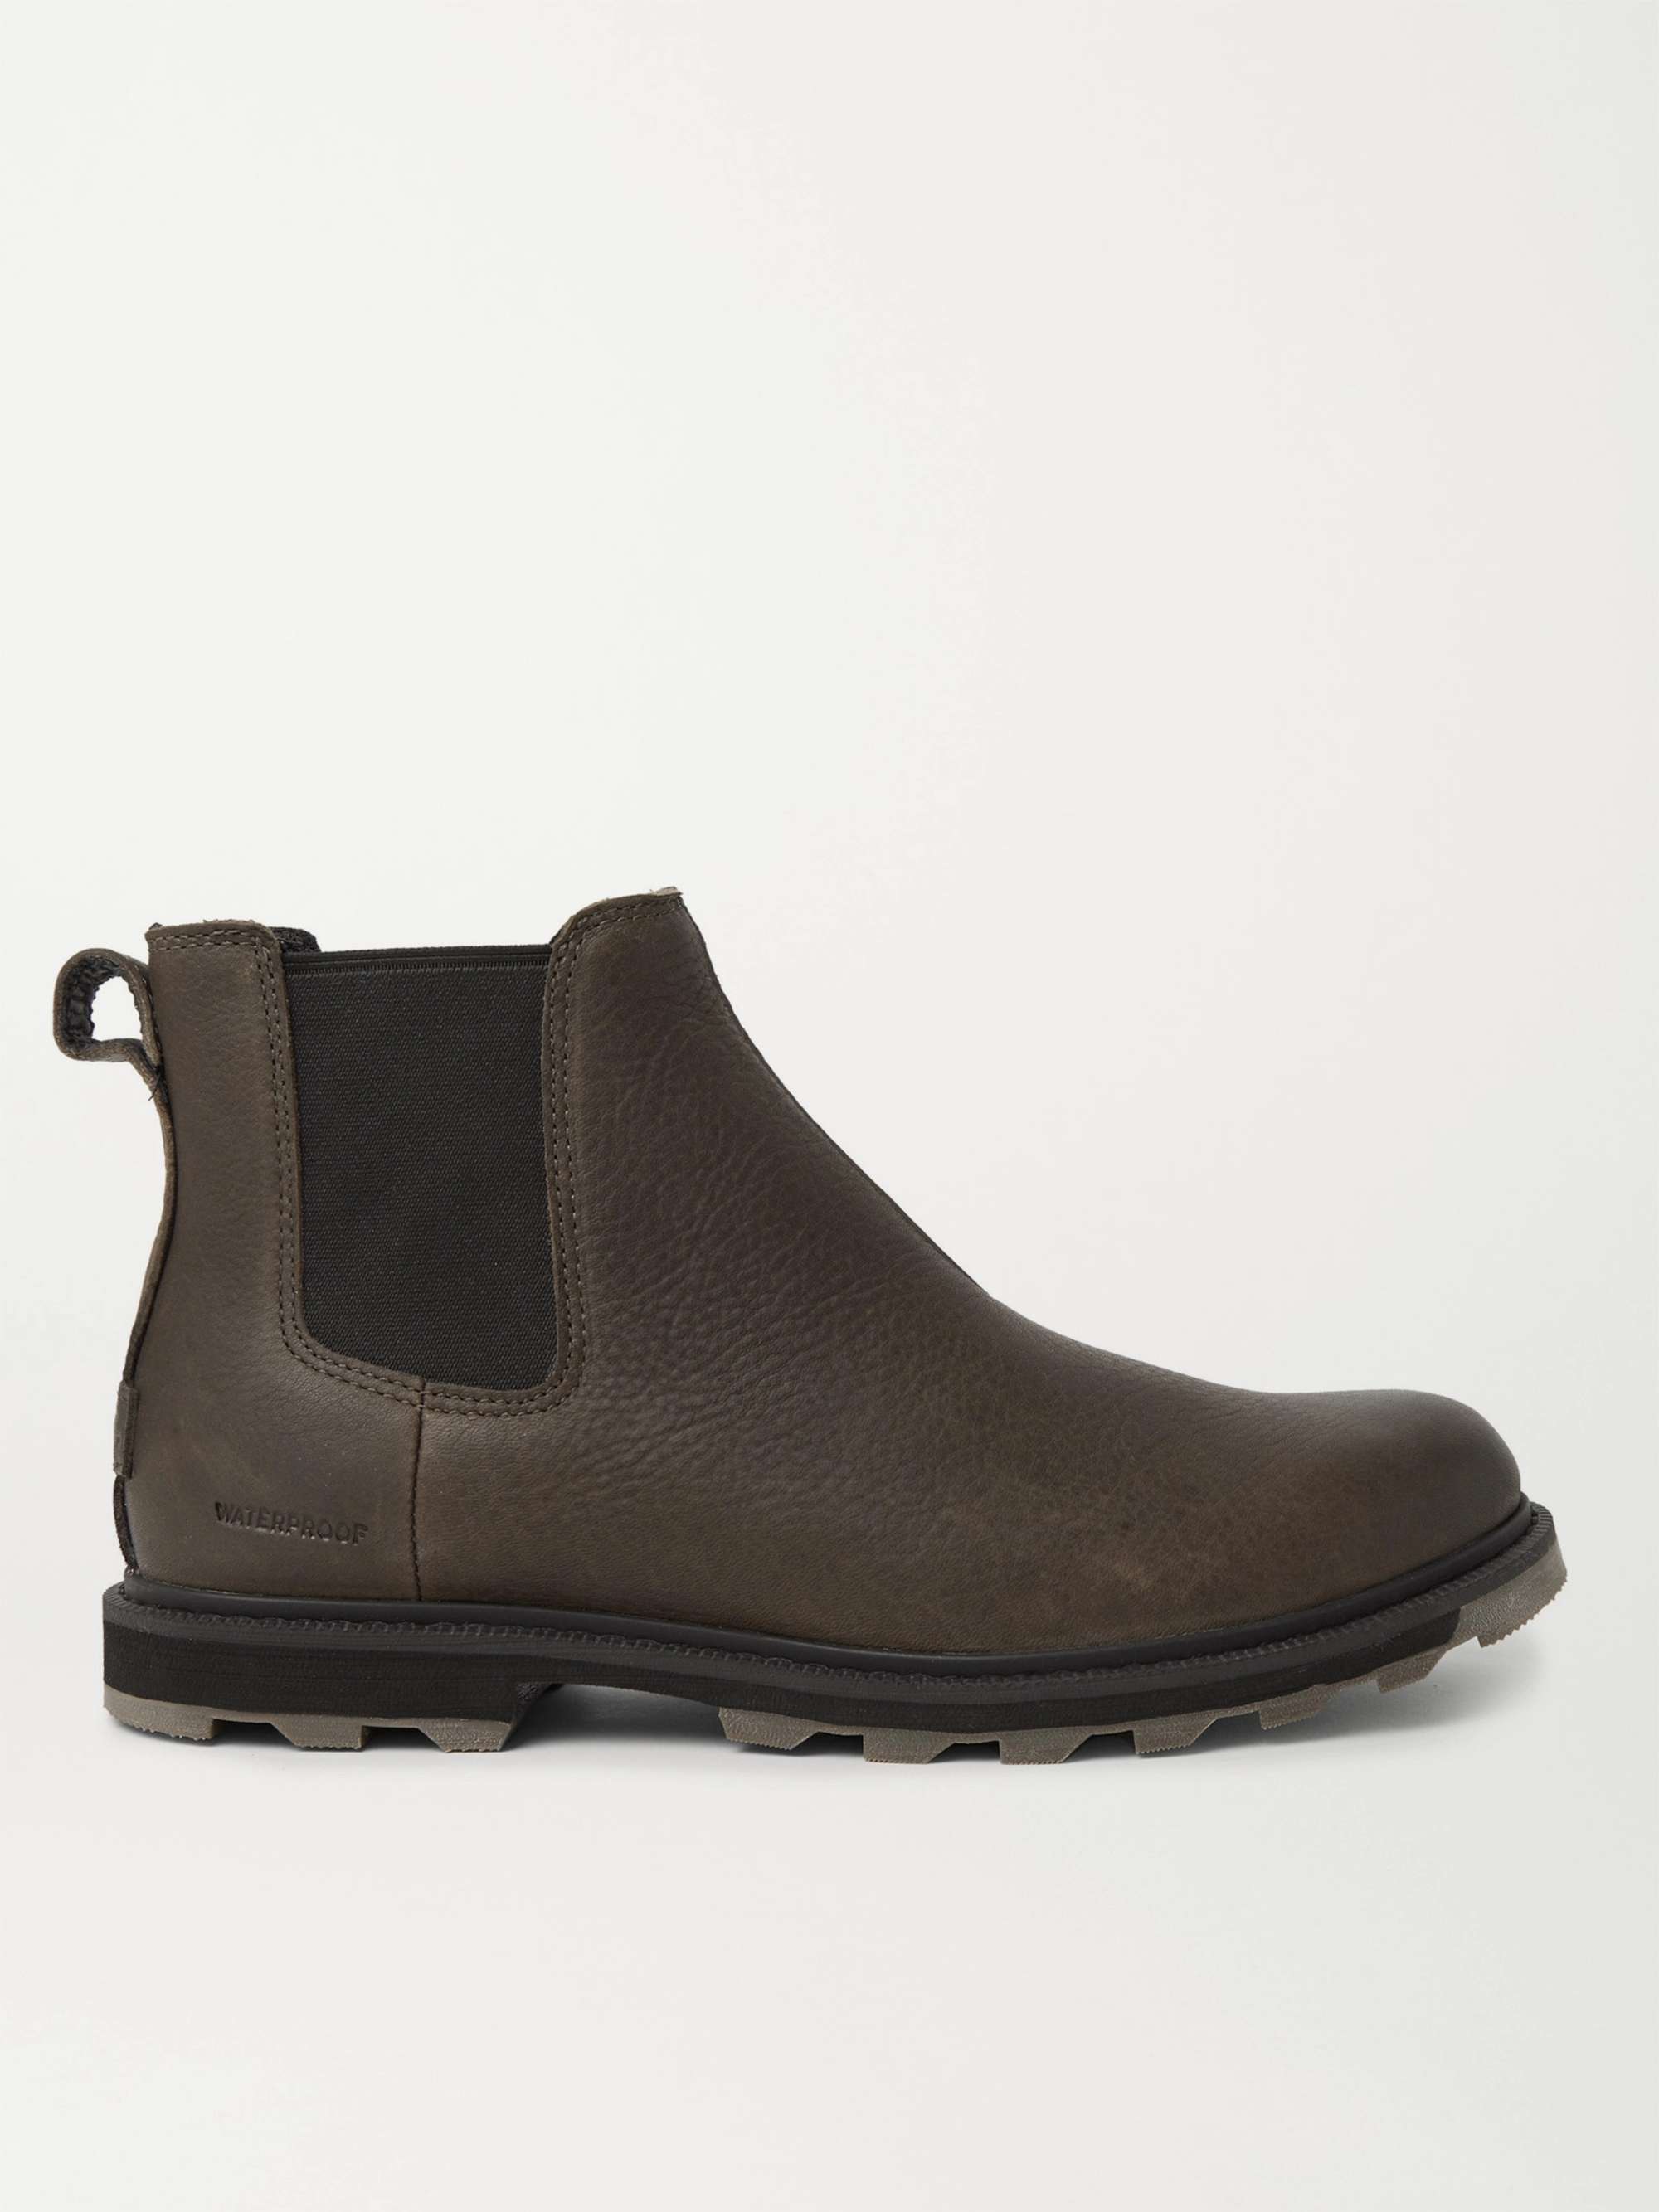 SOREL Madson II Burnished Textured-Leather Chelsea Boots